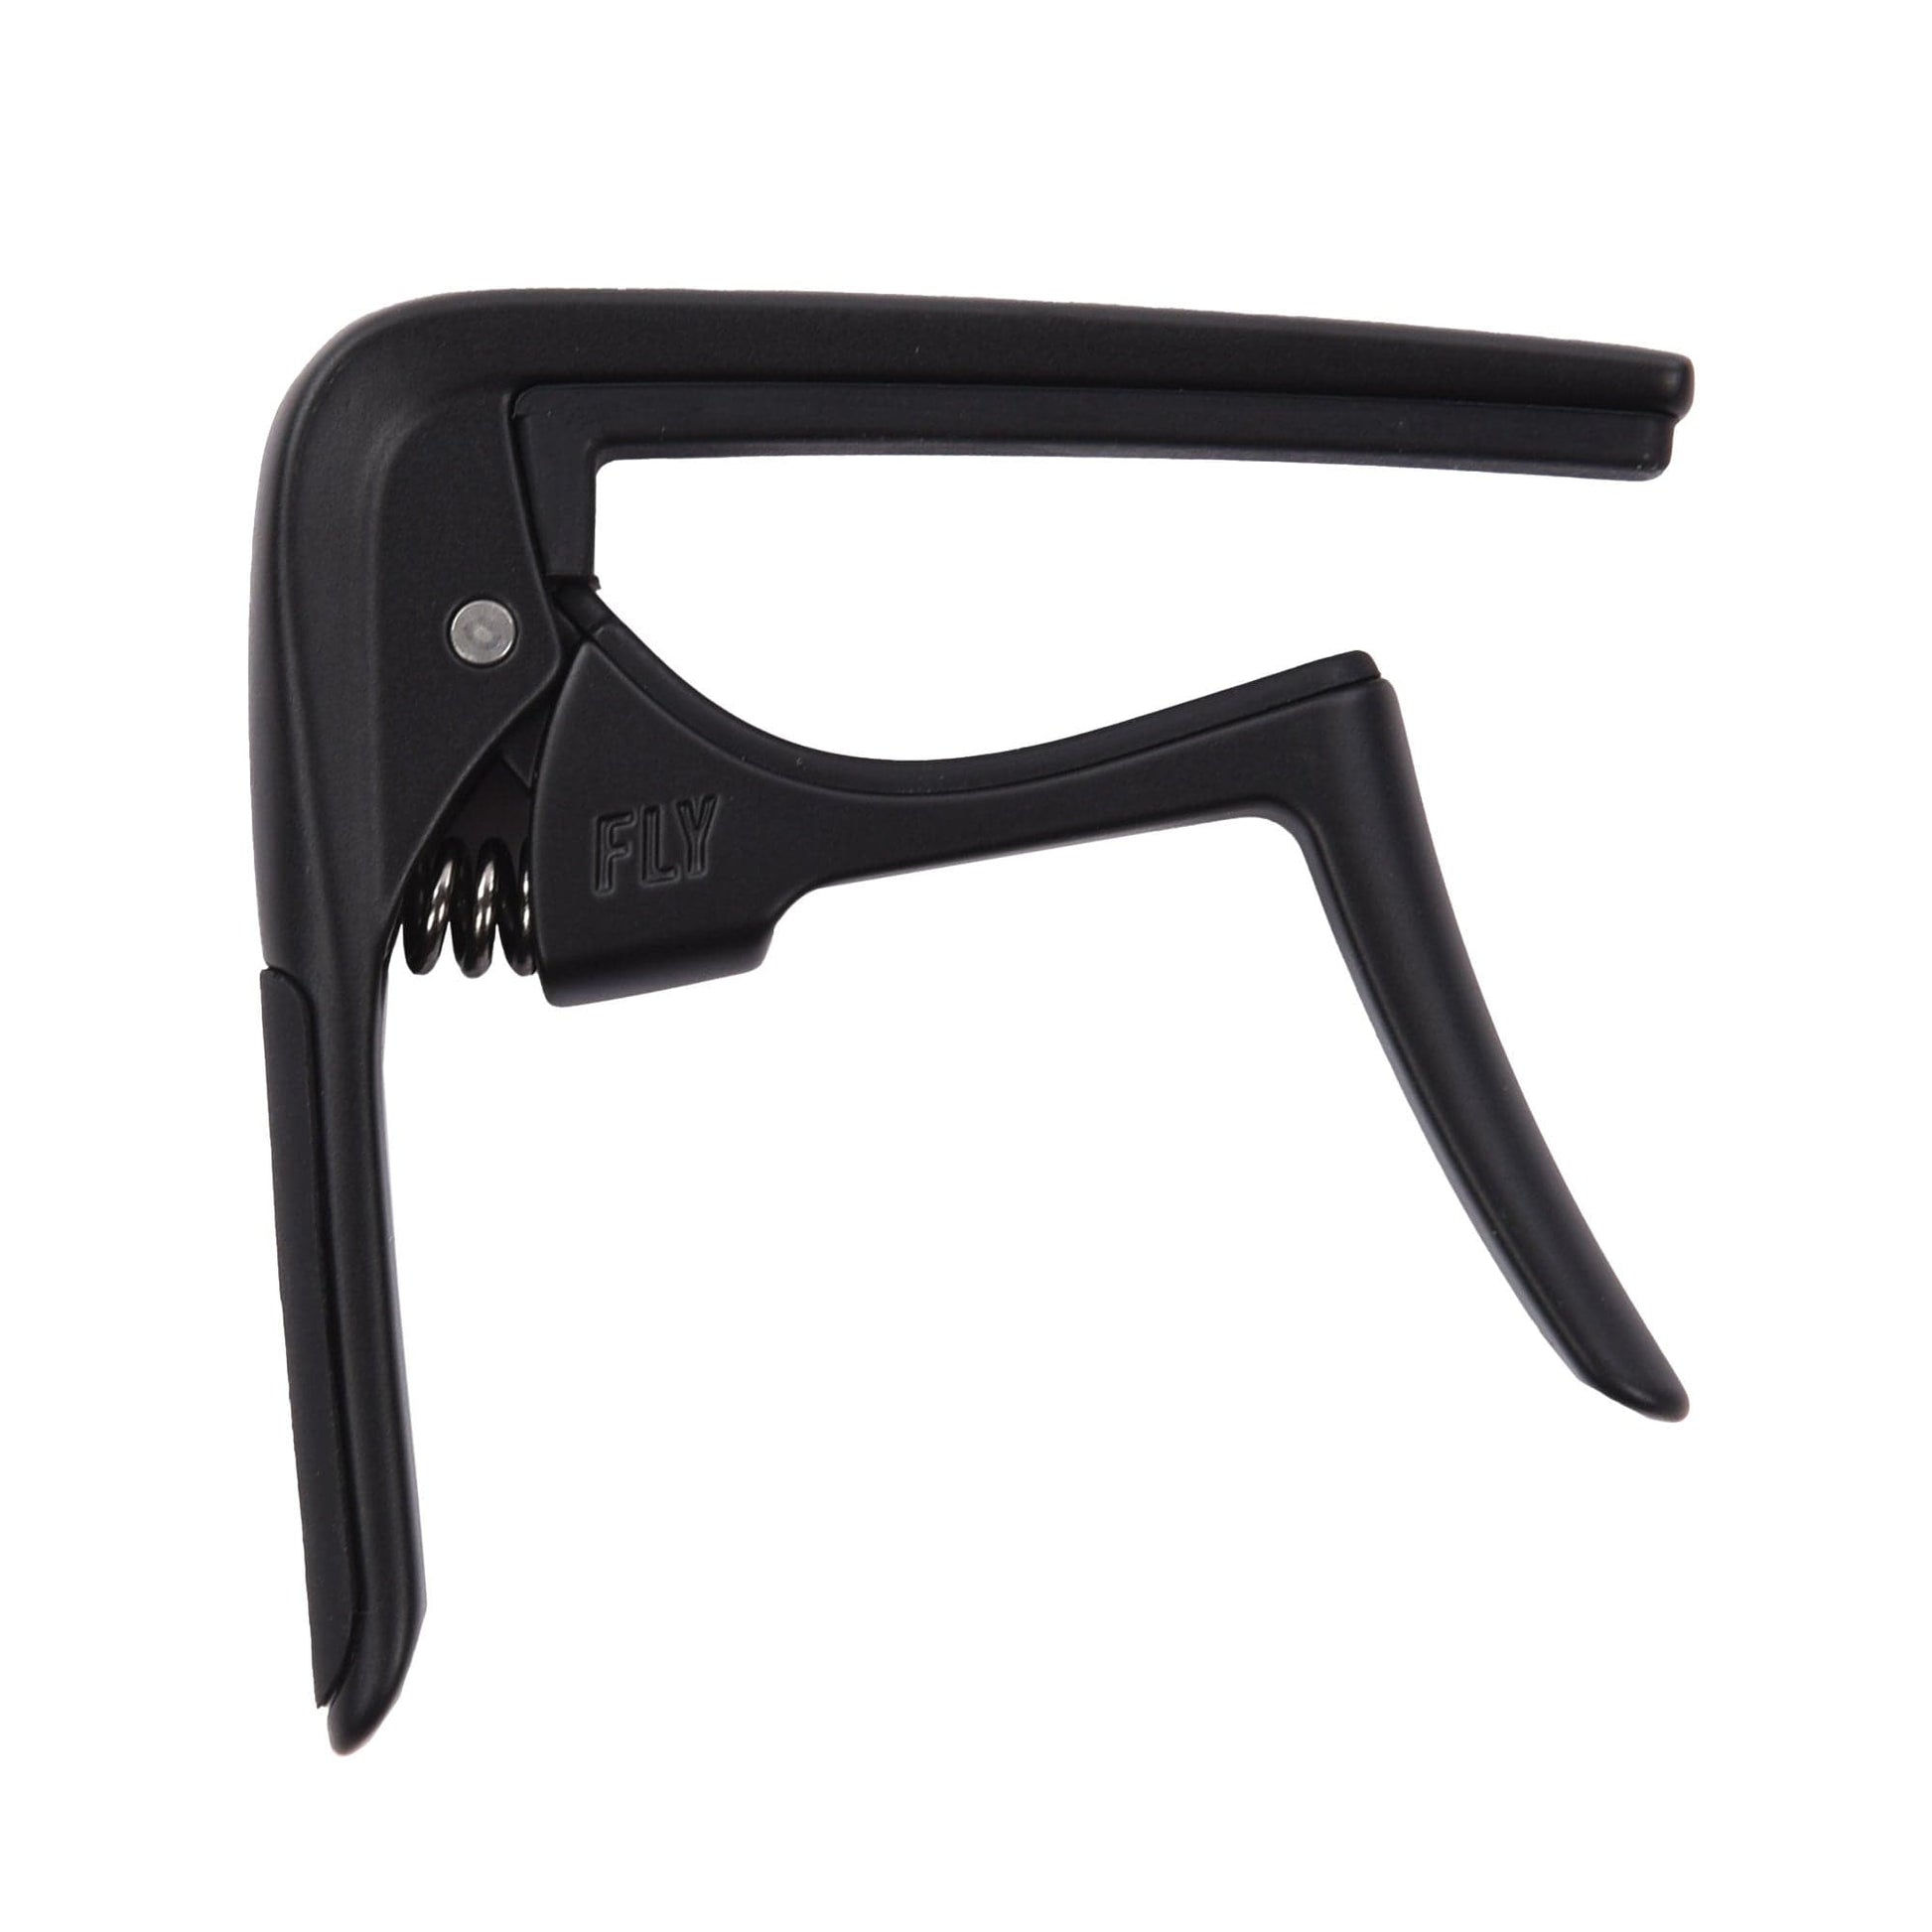 Dunlop Trigger Fly Capo Black Accessories / Capos